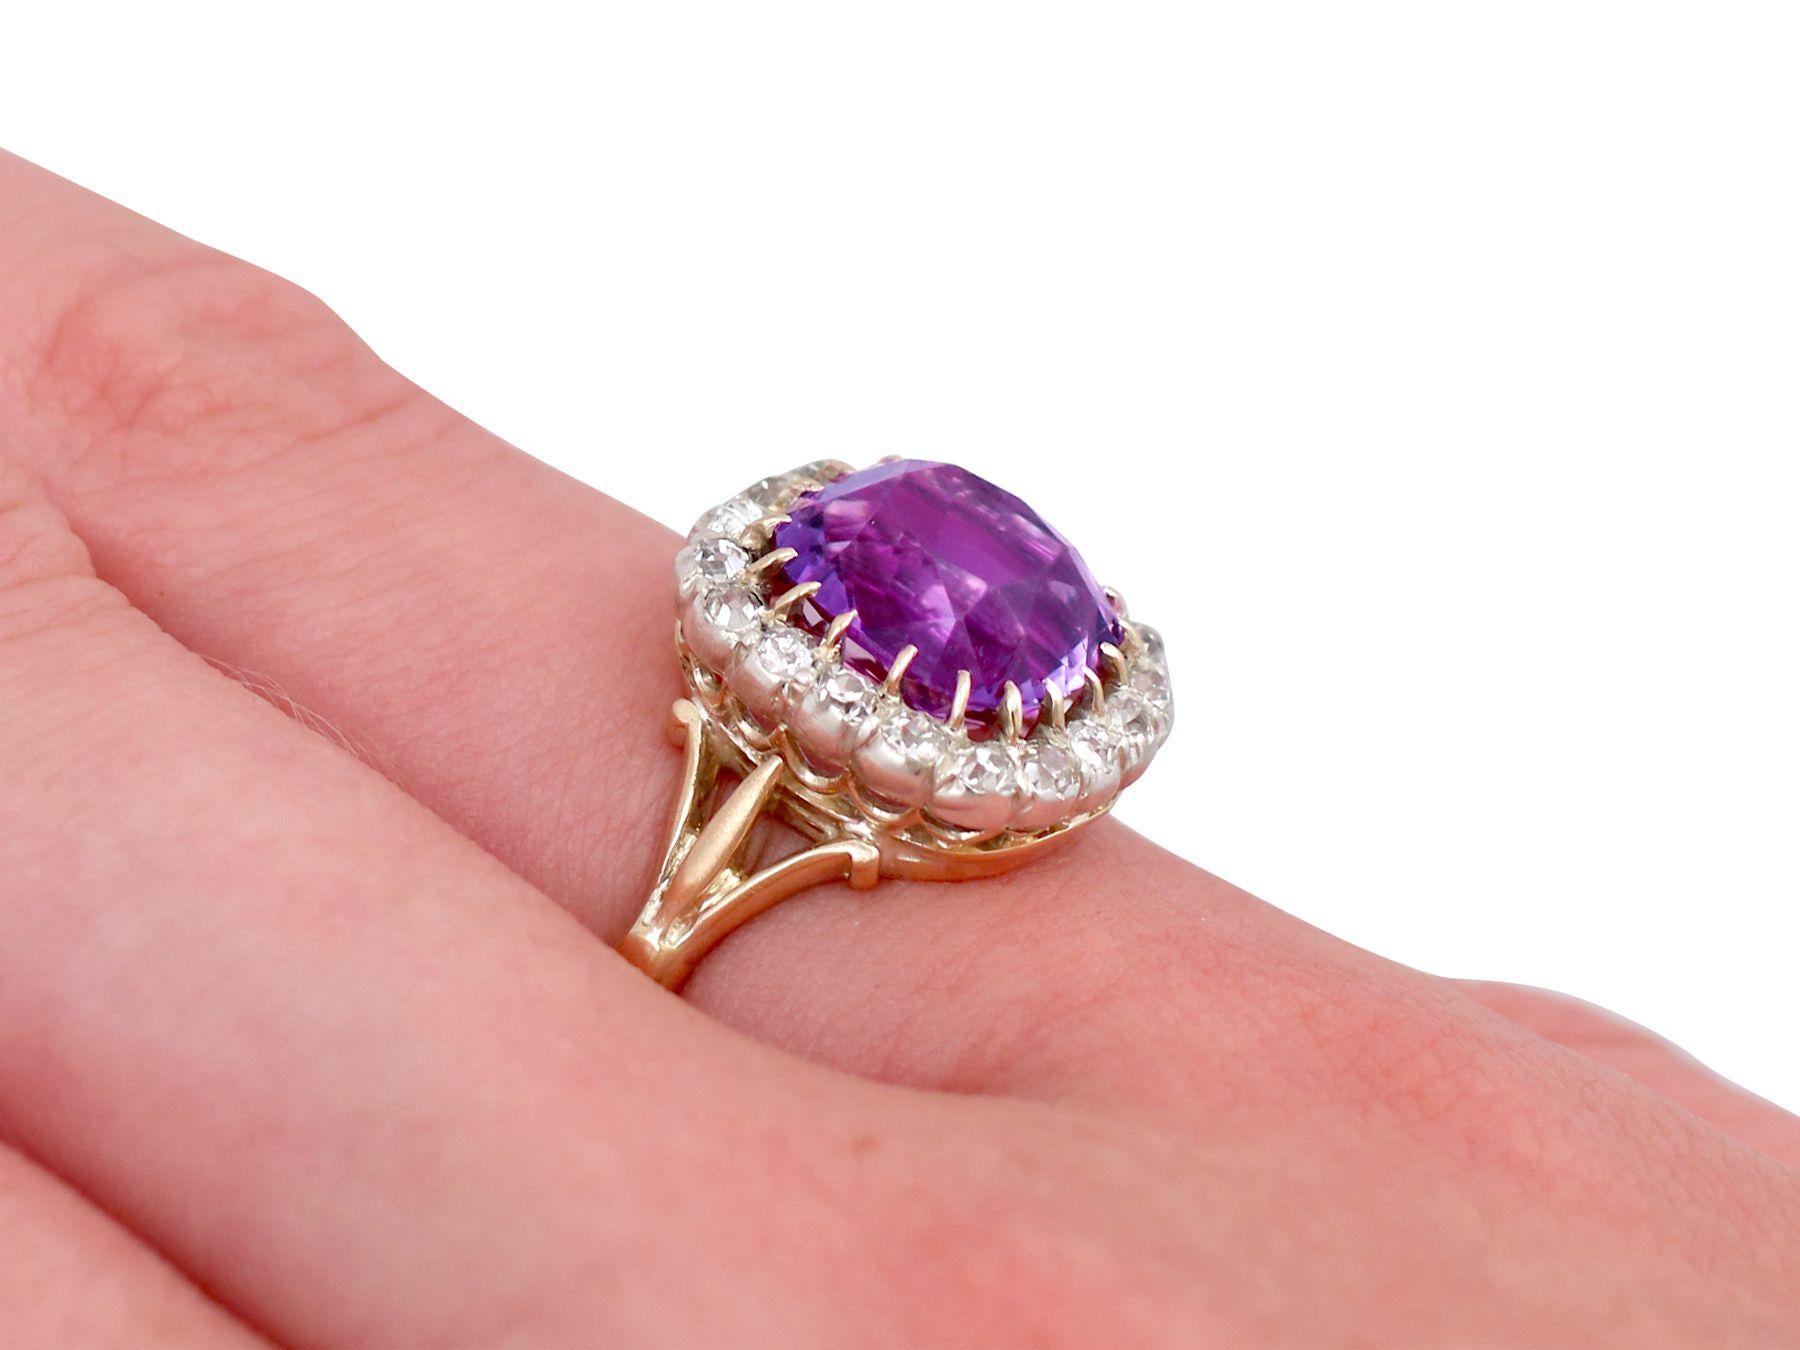 Antique 4.20 Carat Amethyst and Diamond Yellow Gold Cocktail Ring In Excellent Condition For Sale In Jesmond, Newcastle Upon Tyne